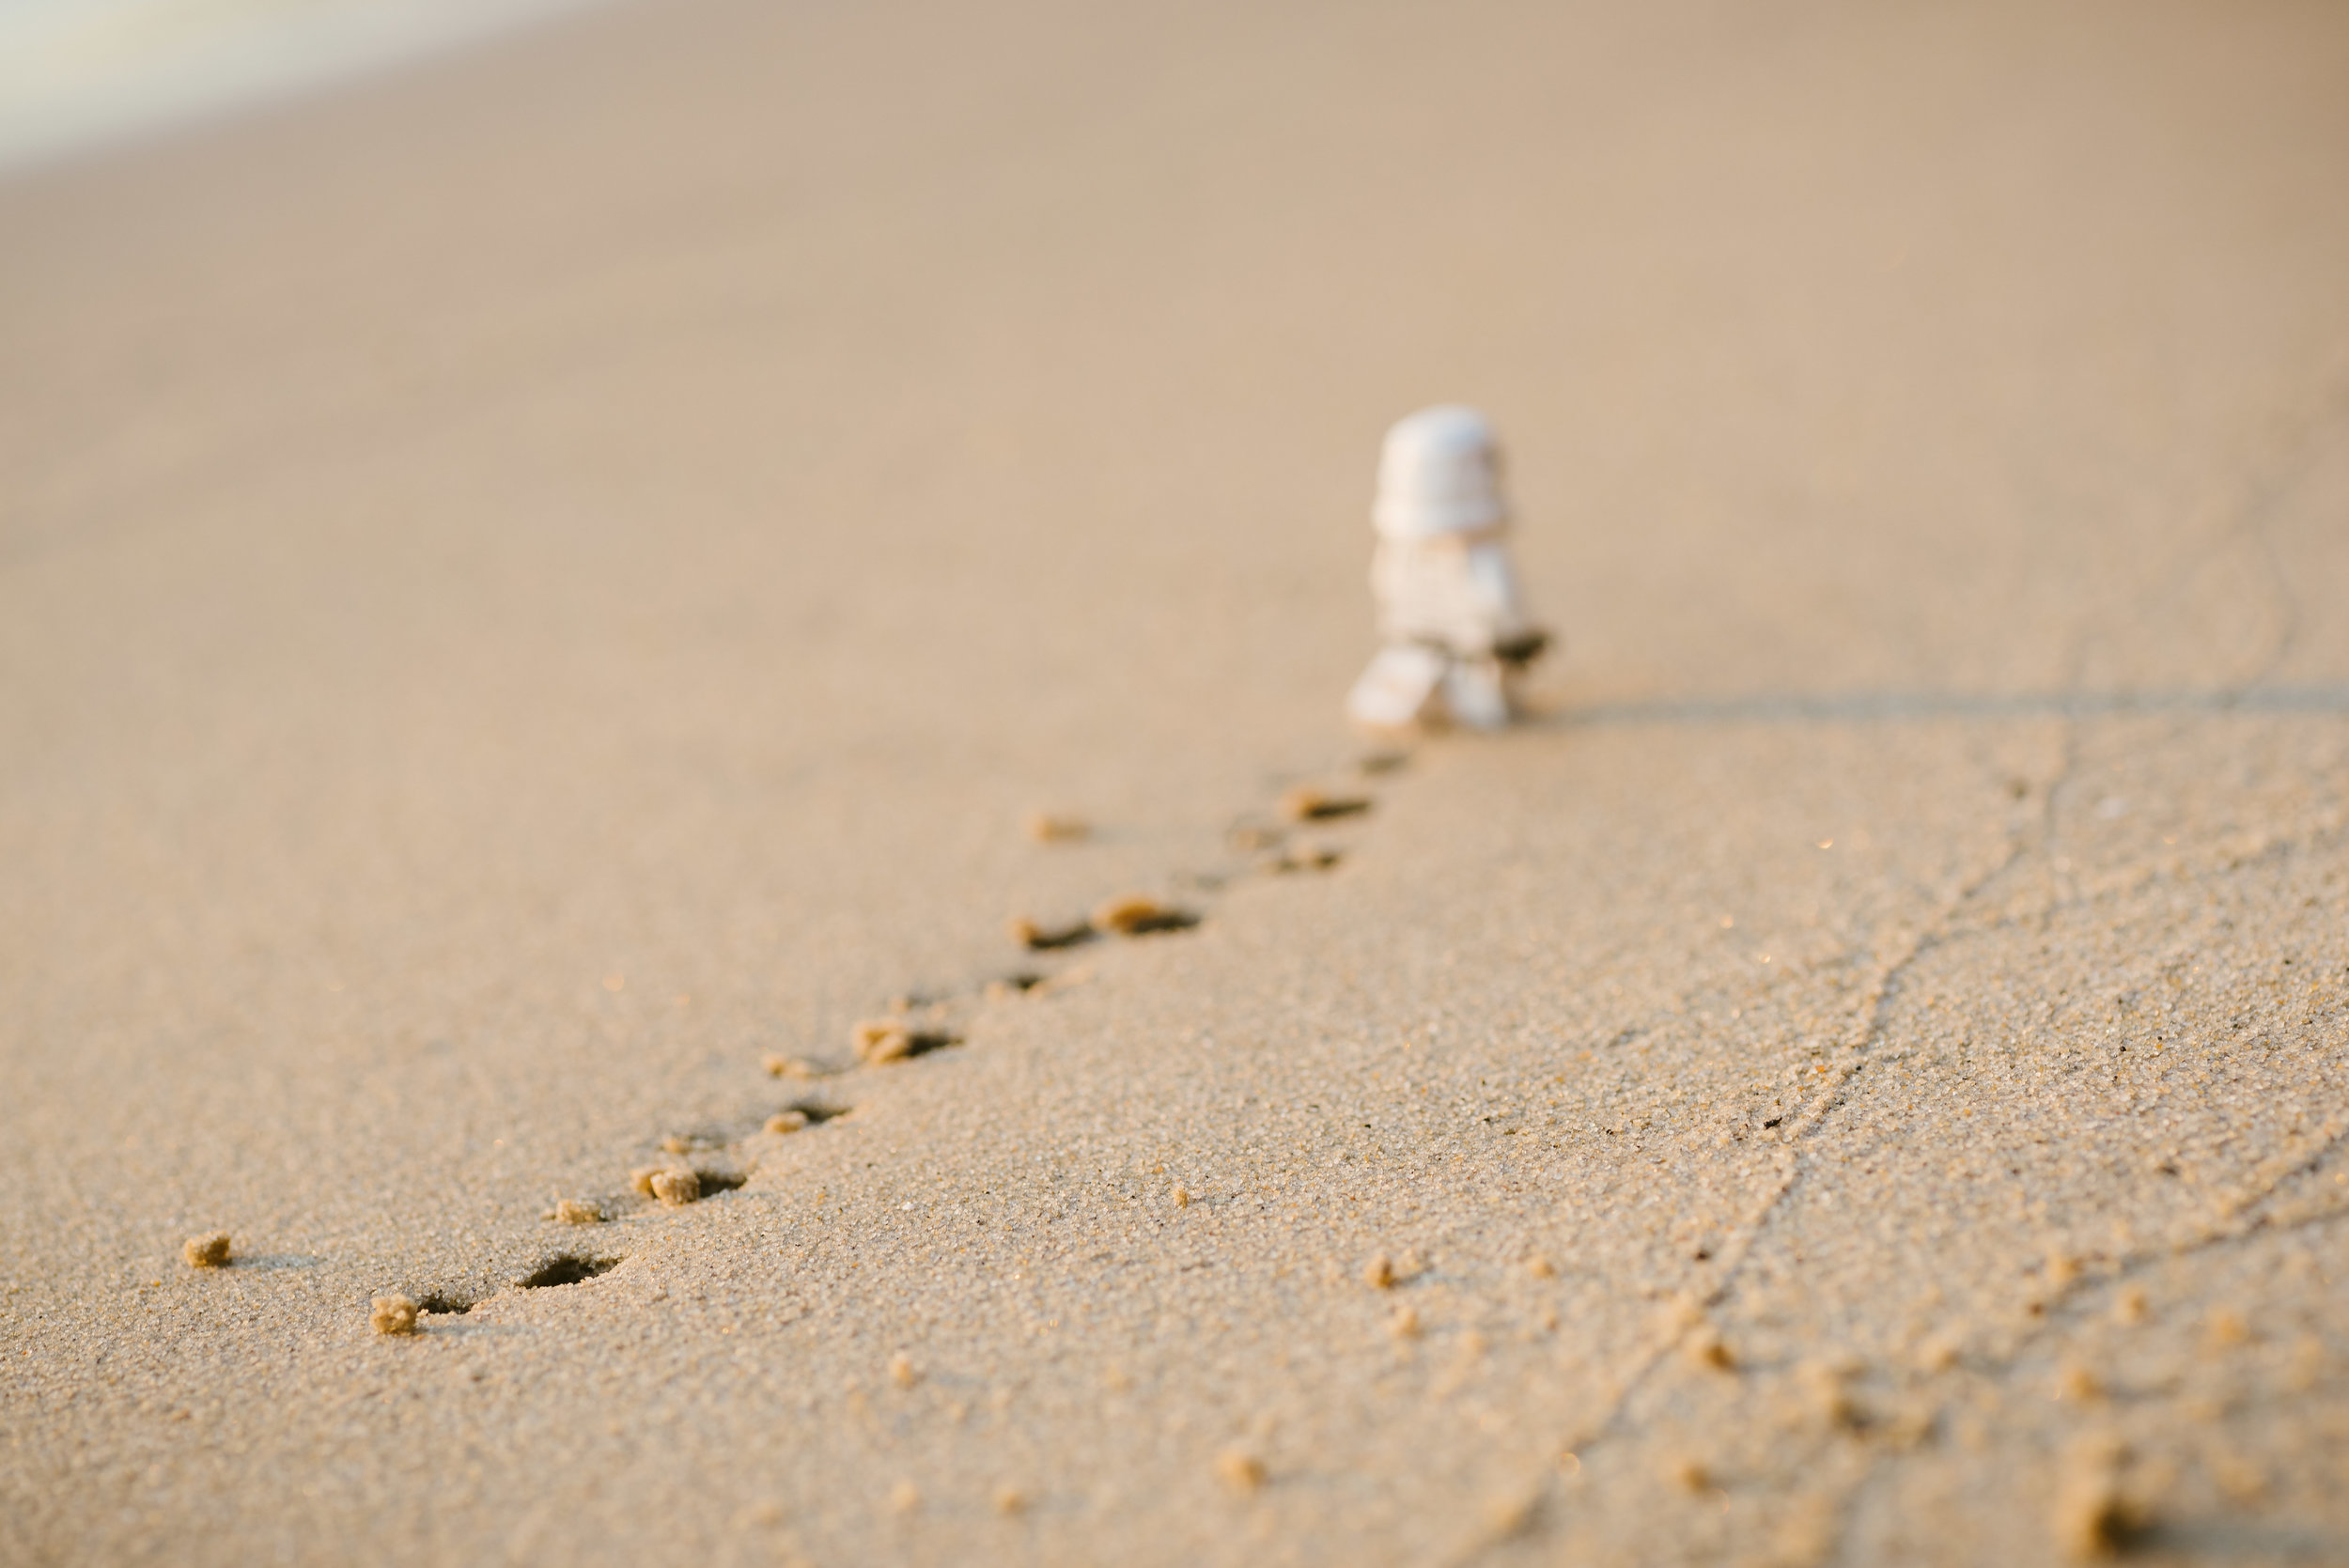 Lego in the sand